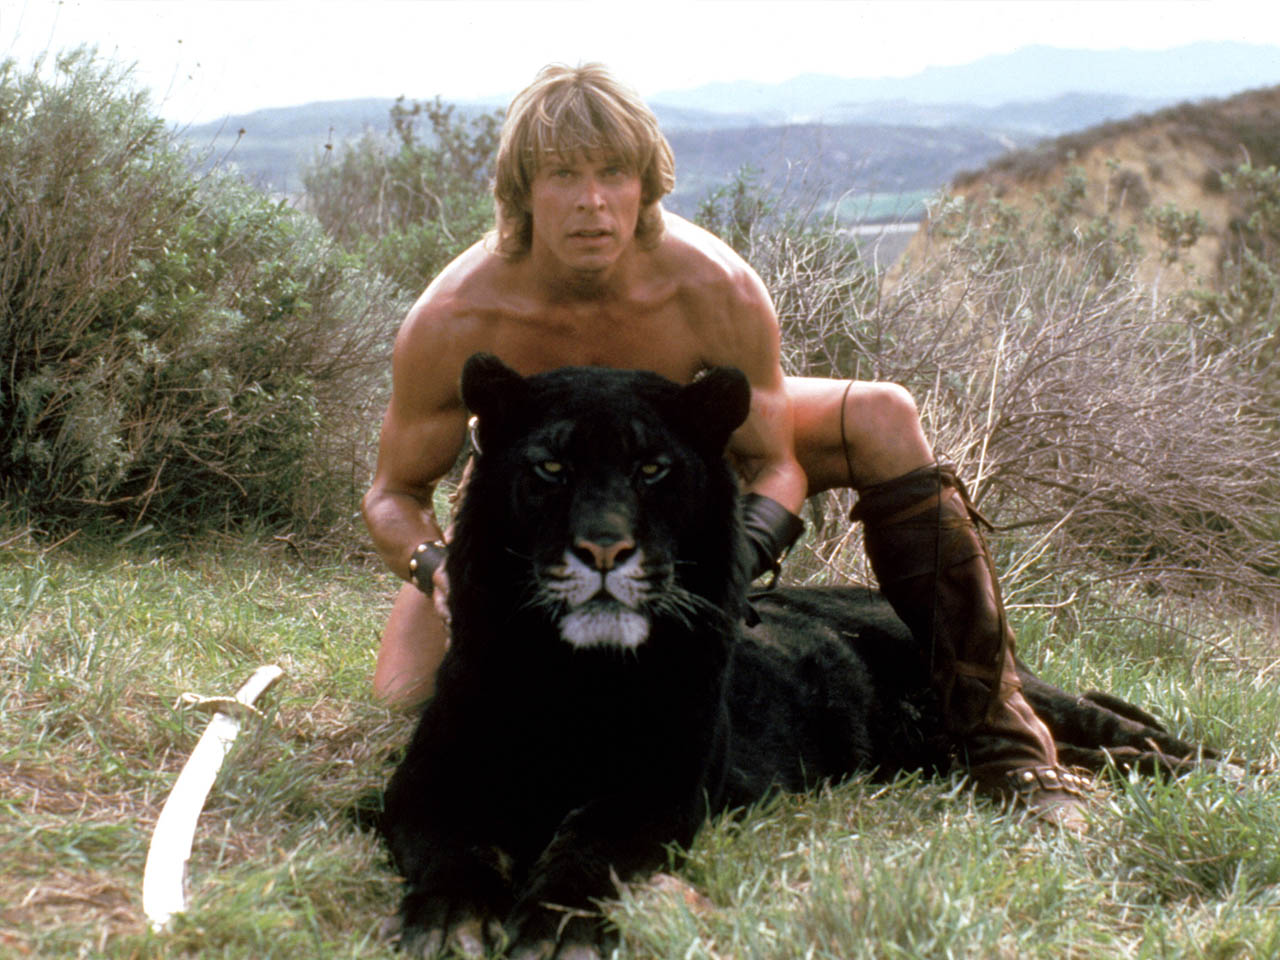 1982 Movie Project - The Beastmaster - 01